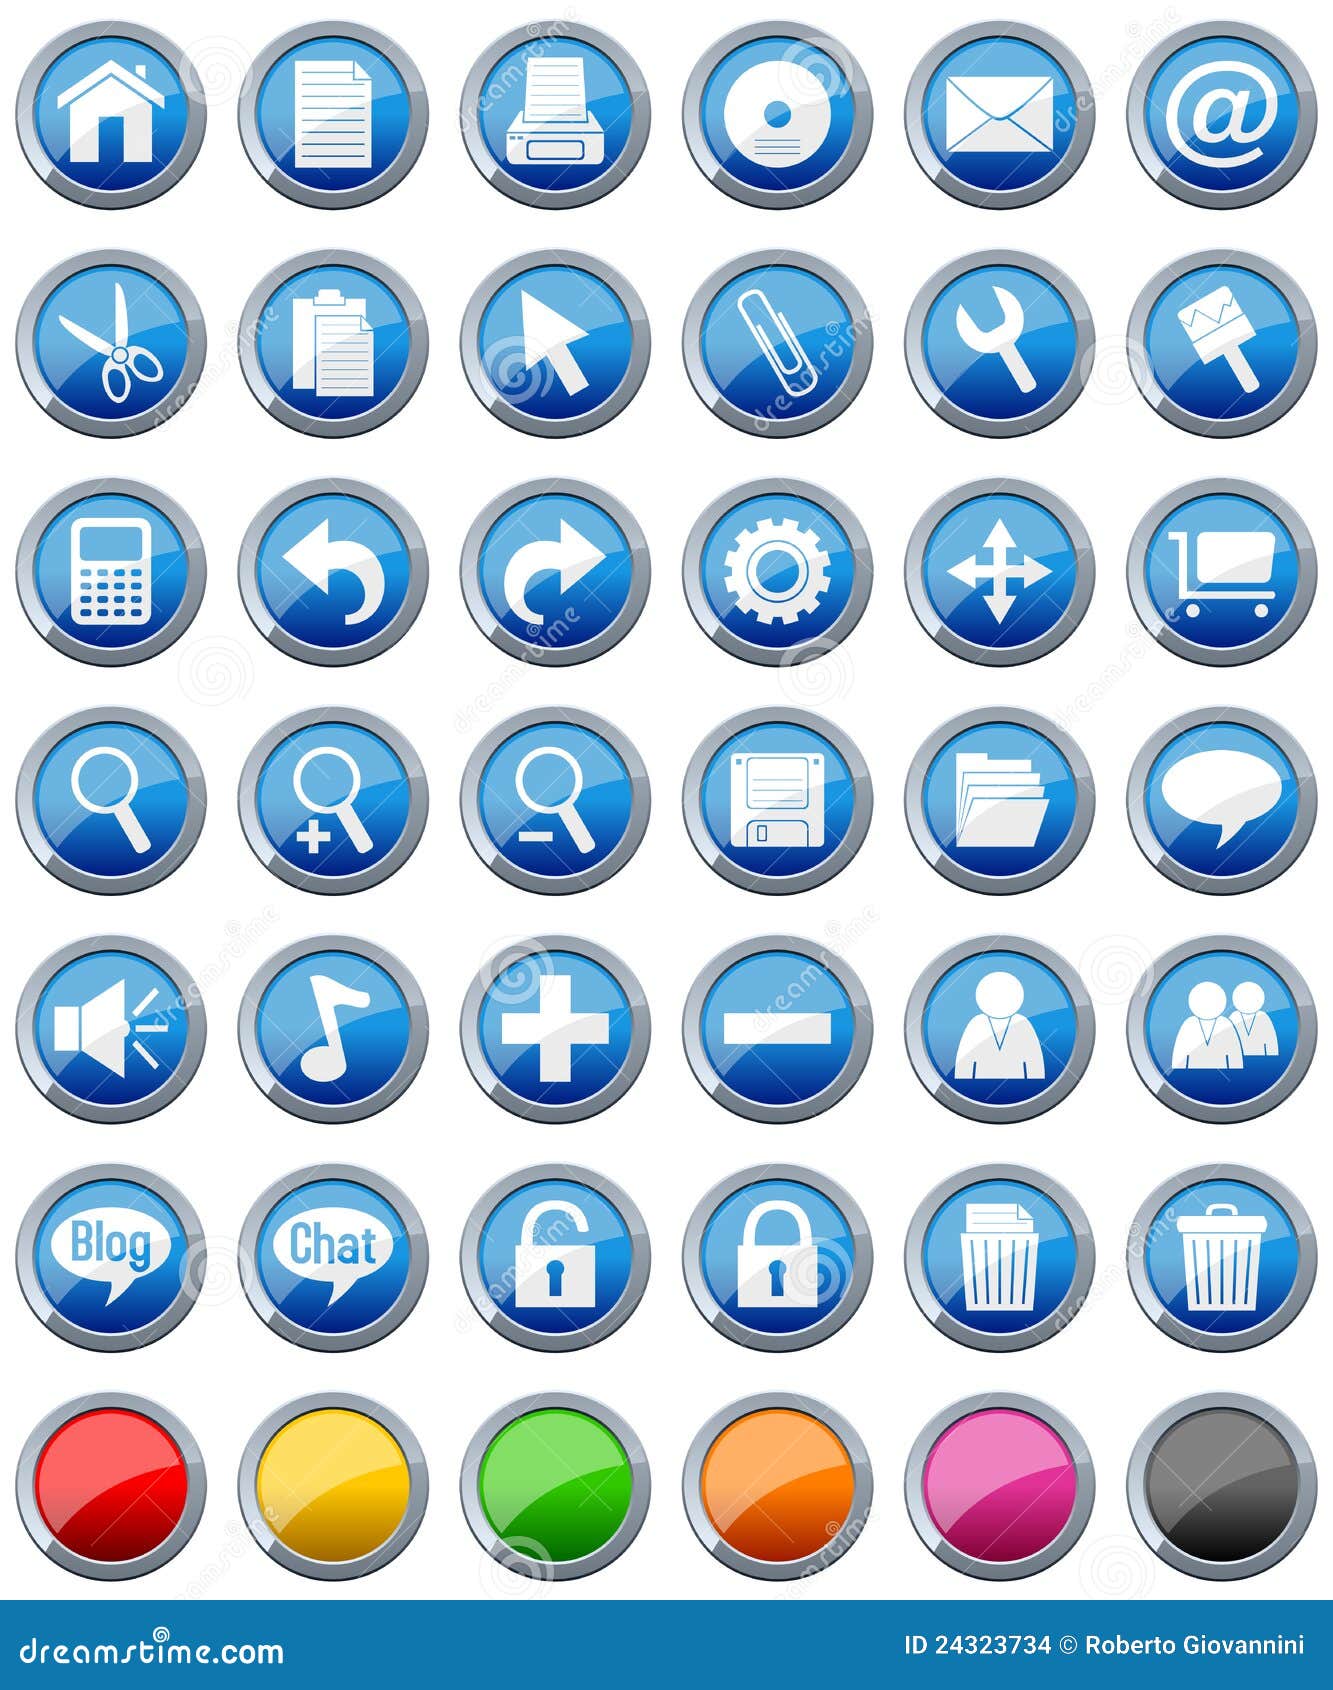 glossy buttons icons set [1]